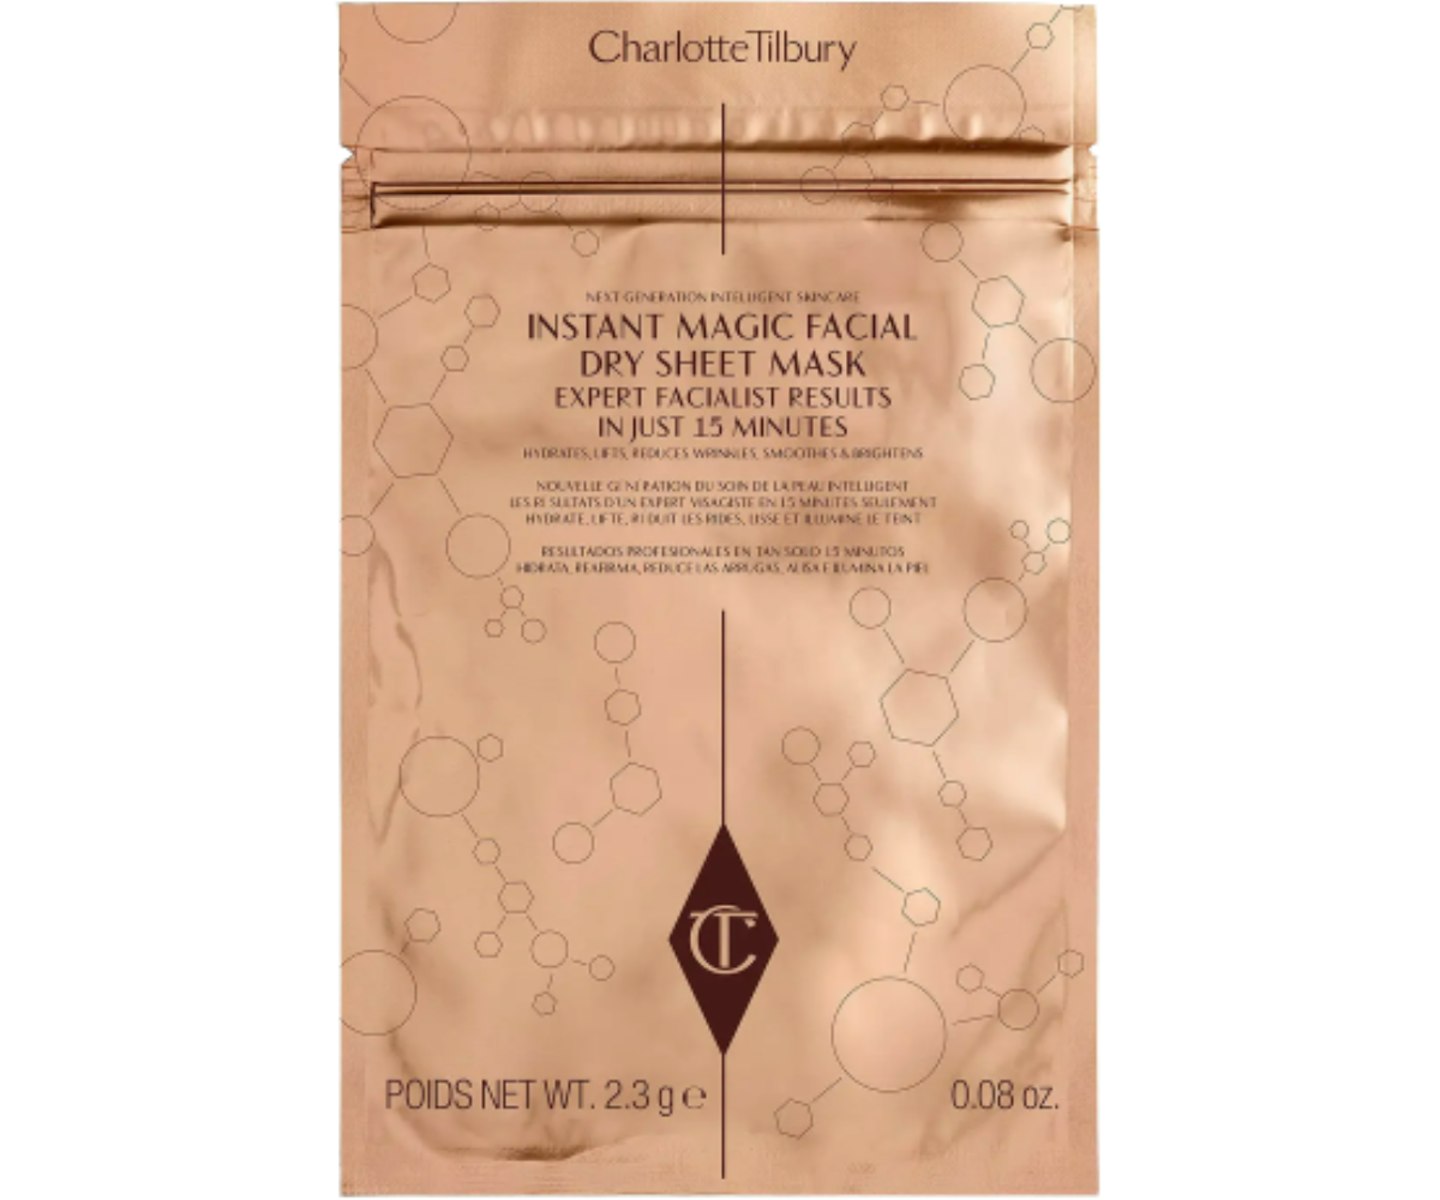 A picture of the Charlotte Tilbury Instant Magic Facial Dry Sheet Mask